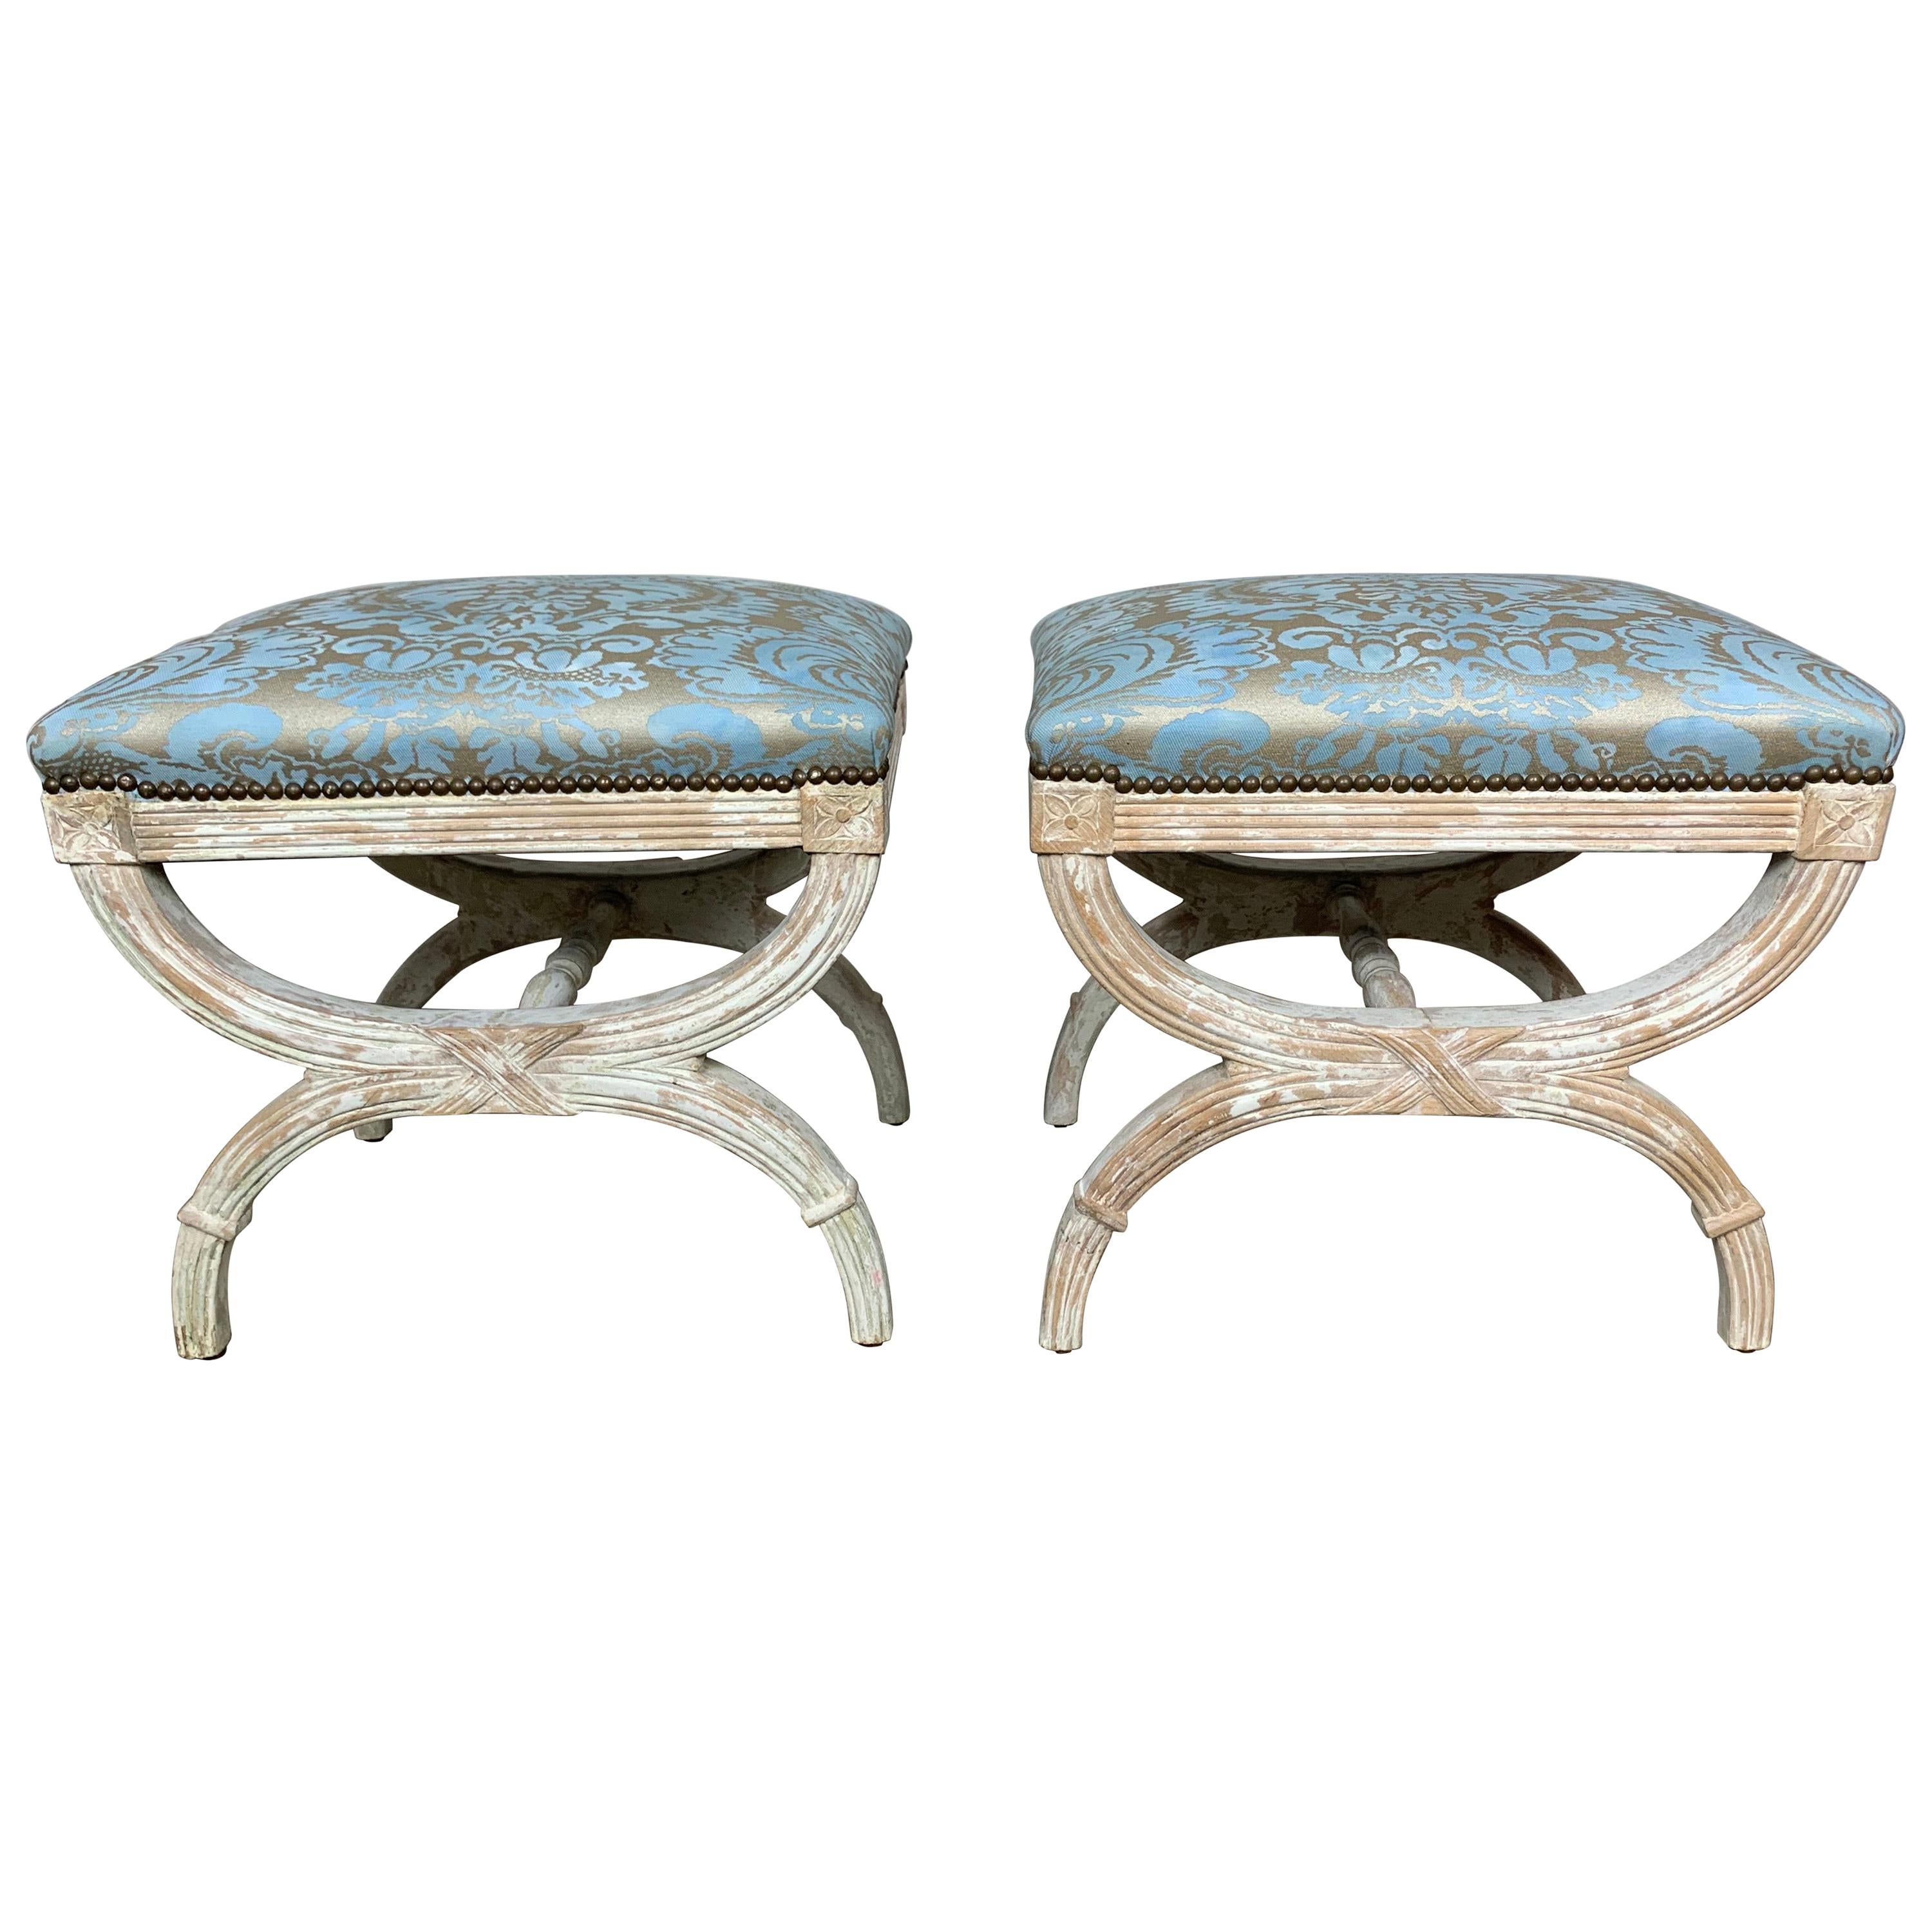 "X" Frame Fortuny Upholstered White Wash Benches, Pair